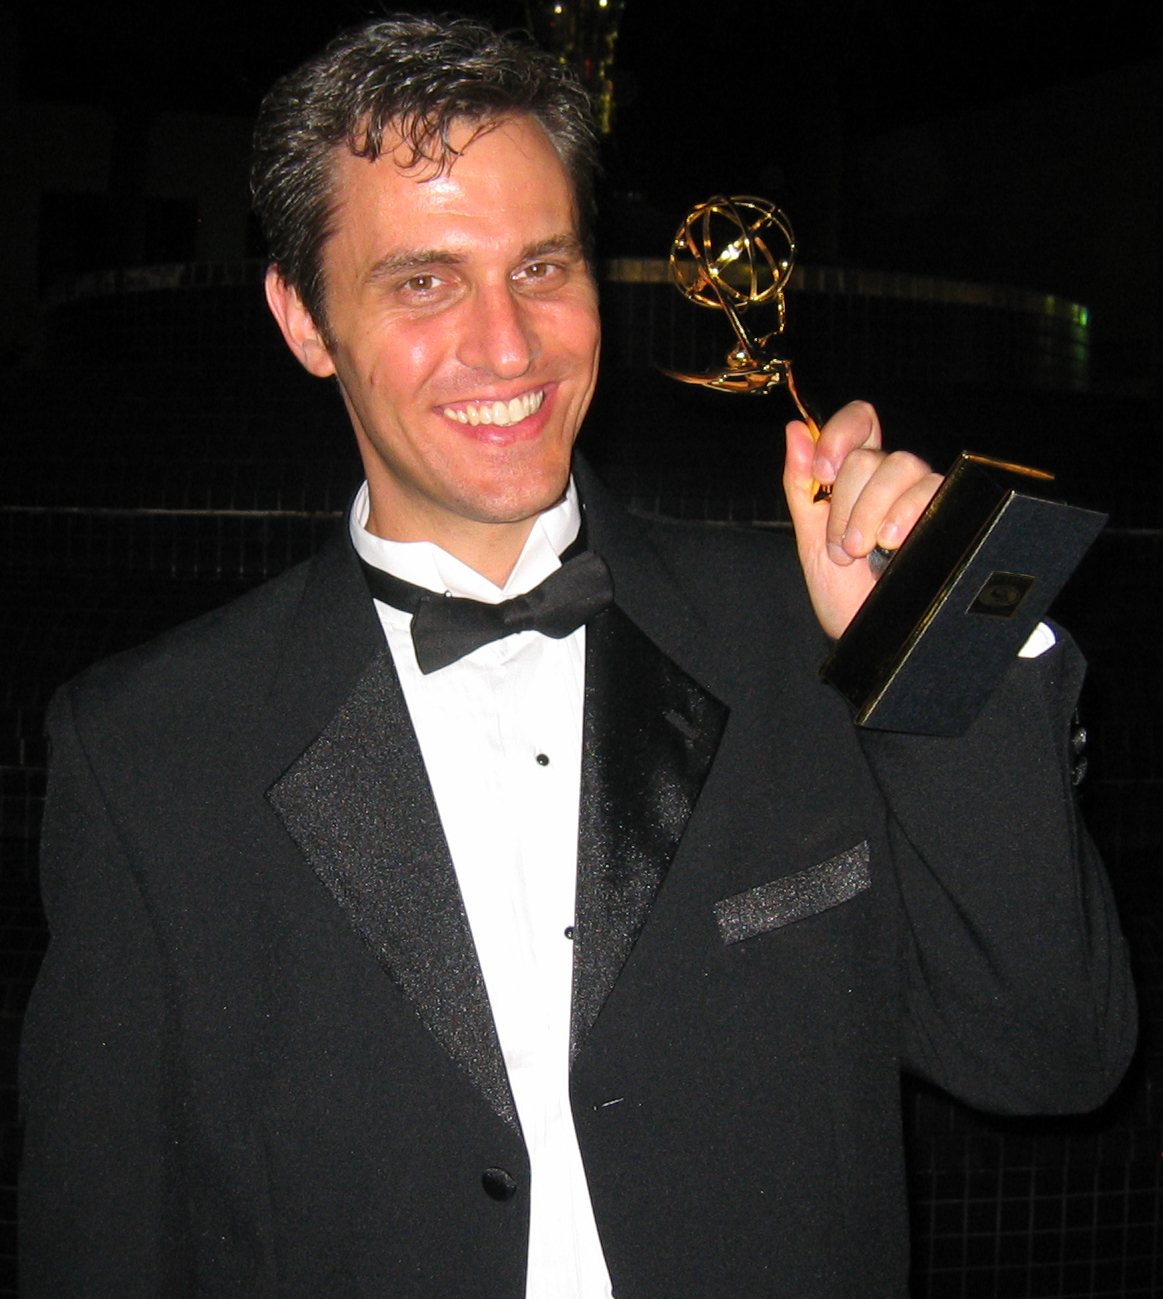 Richard Gale at the 57th Annual Los Angeles Area Emmy Awards. Gale has won three Emmys, and received six nominations.